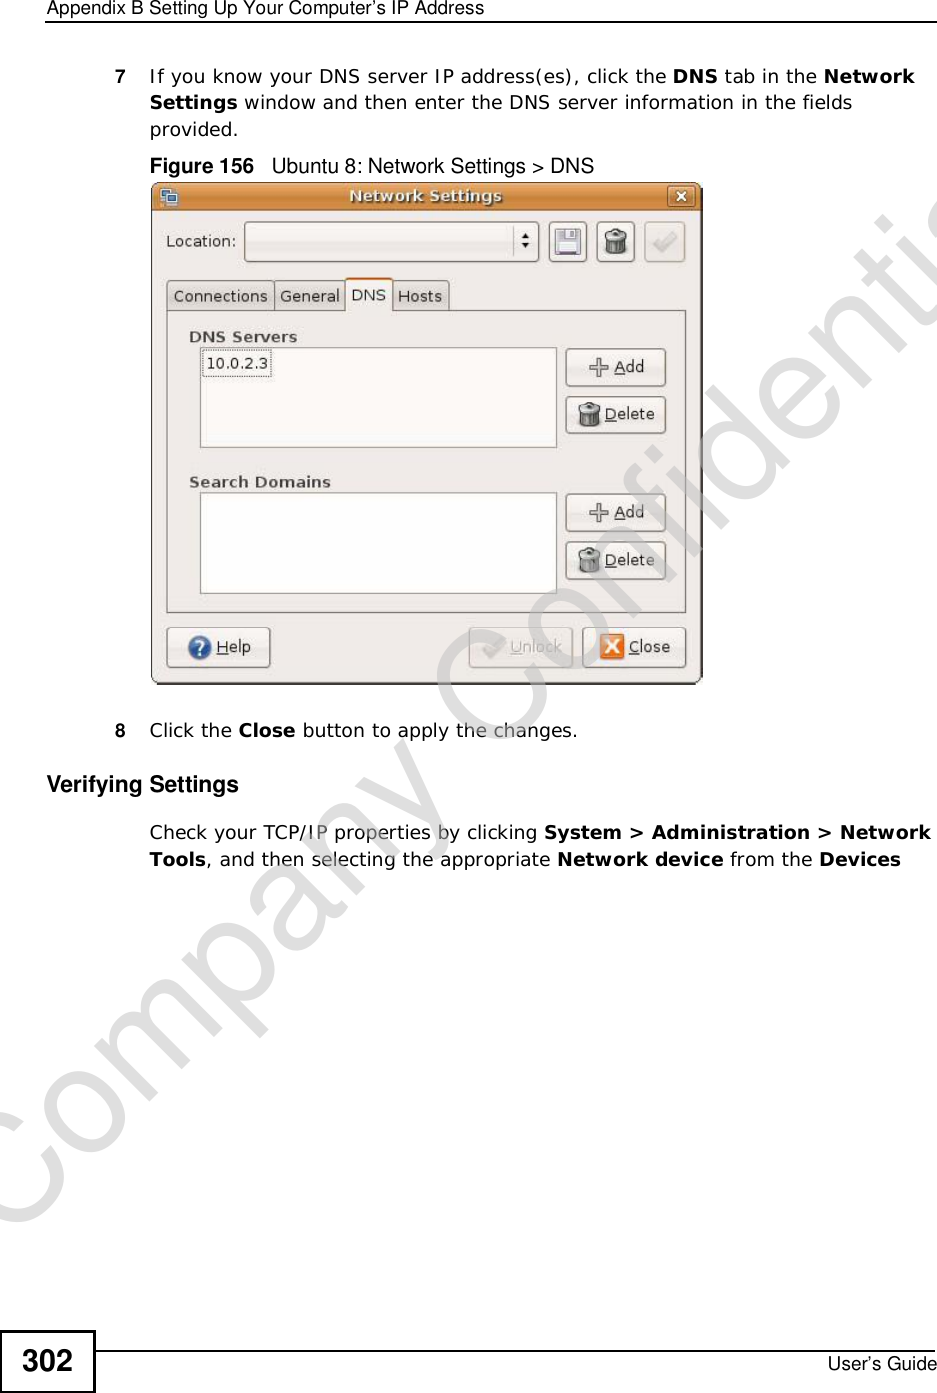 Appendix BSetting Up Your Computer’s IP AddressUser’s Guide3027If you know your DNS server IP address(es), click the DNS tab in the Network Settings window and then enter the DNS server information in the fields provided. Figure 156   Ubuntu 8: Network Settings &gt; DNS  8Click the Close button to apply the changes.Verifying SettingsCheck your TCP/IP properties by clicking System &gt; Administration &gt; Network Tools, and then selecting the appropriate Network device from the DevicesCompany Confidential